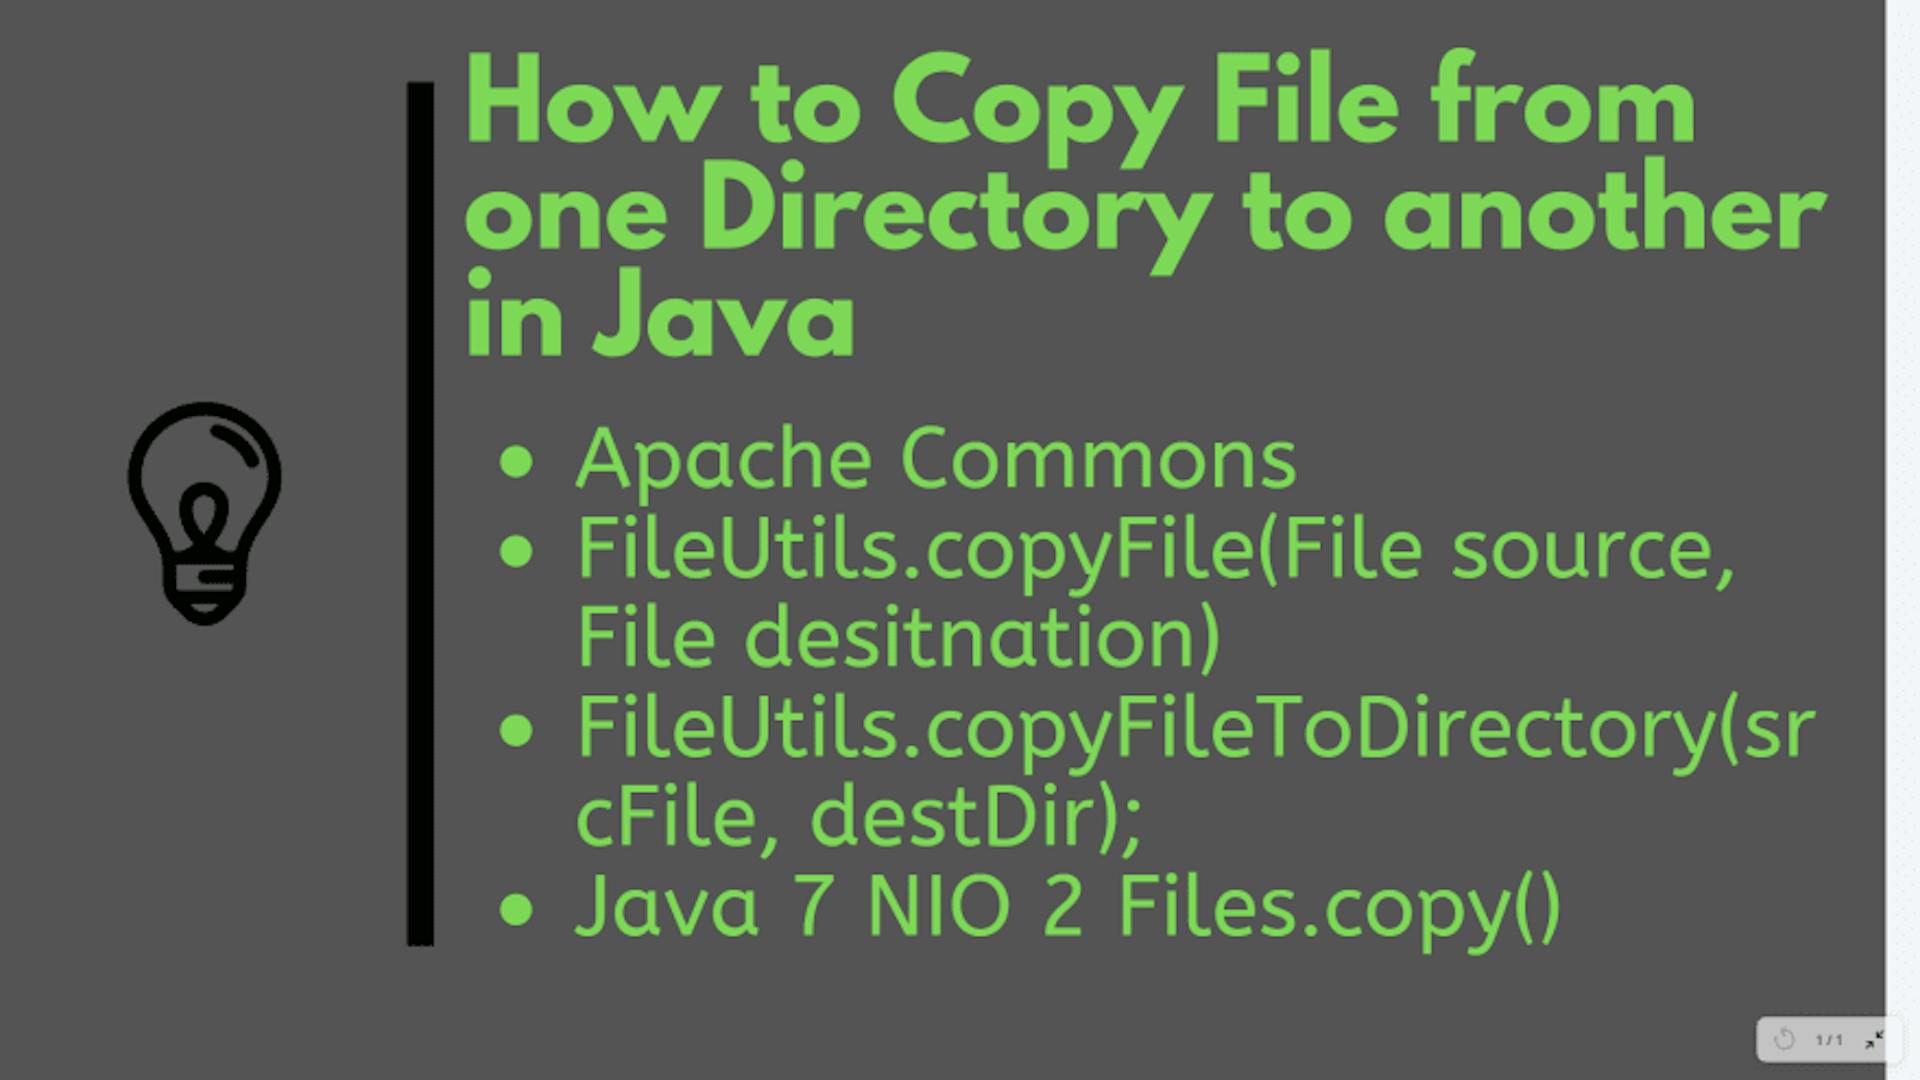 How to copy files from one directory to another in Java